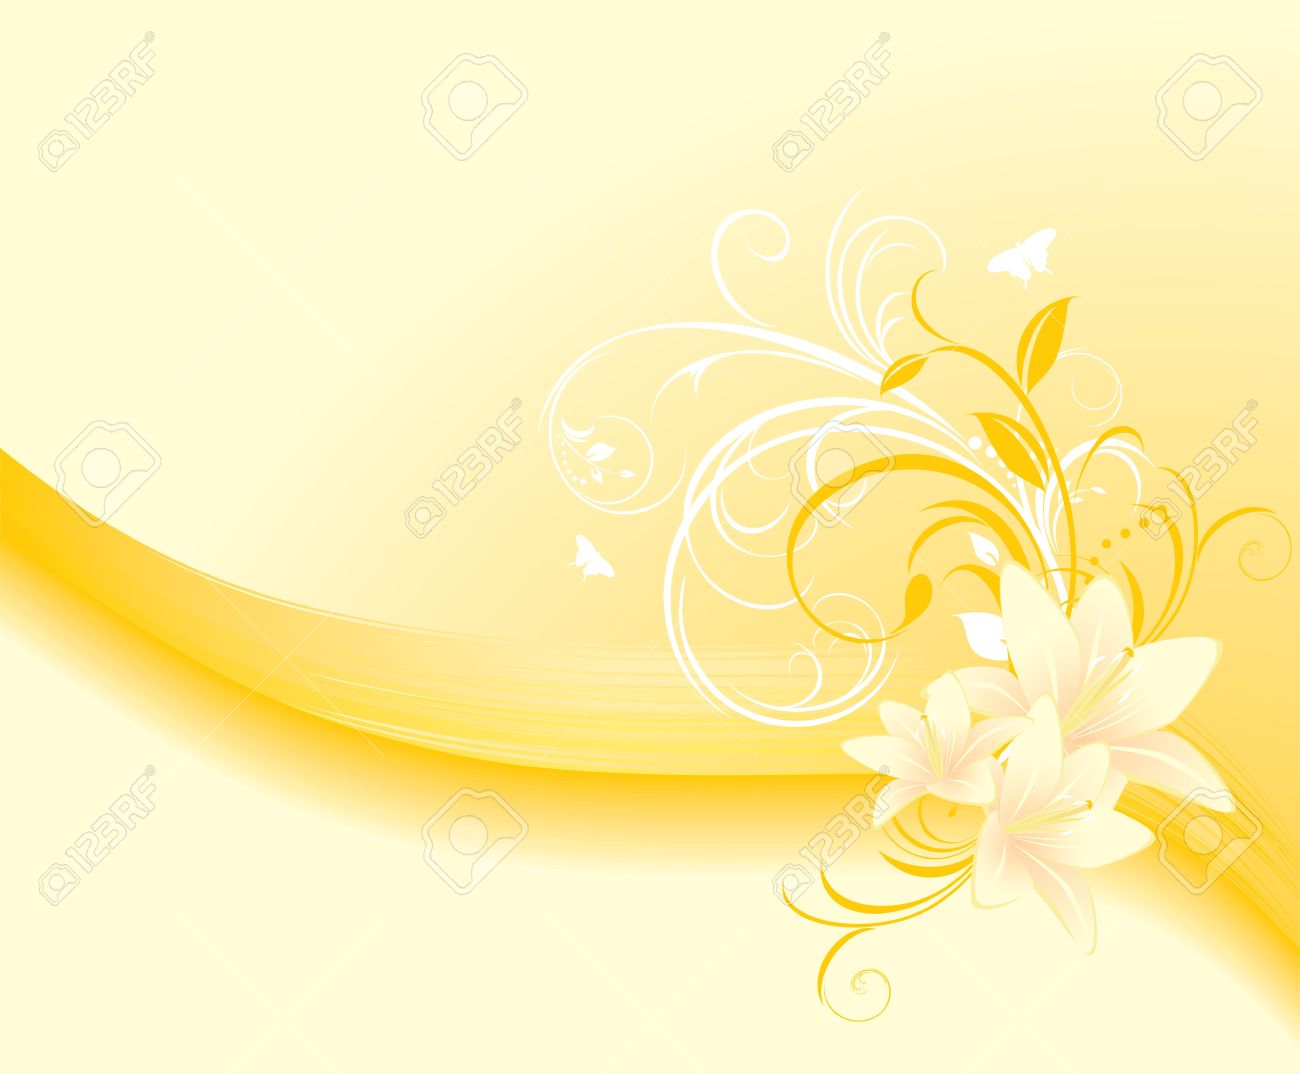 Floral Ornament With Lilies On The Yellow Background Royalty